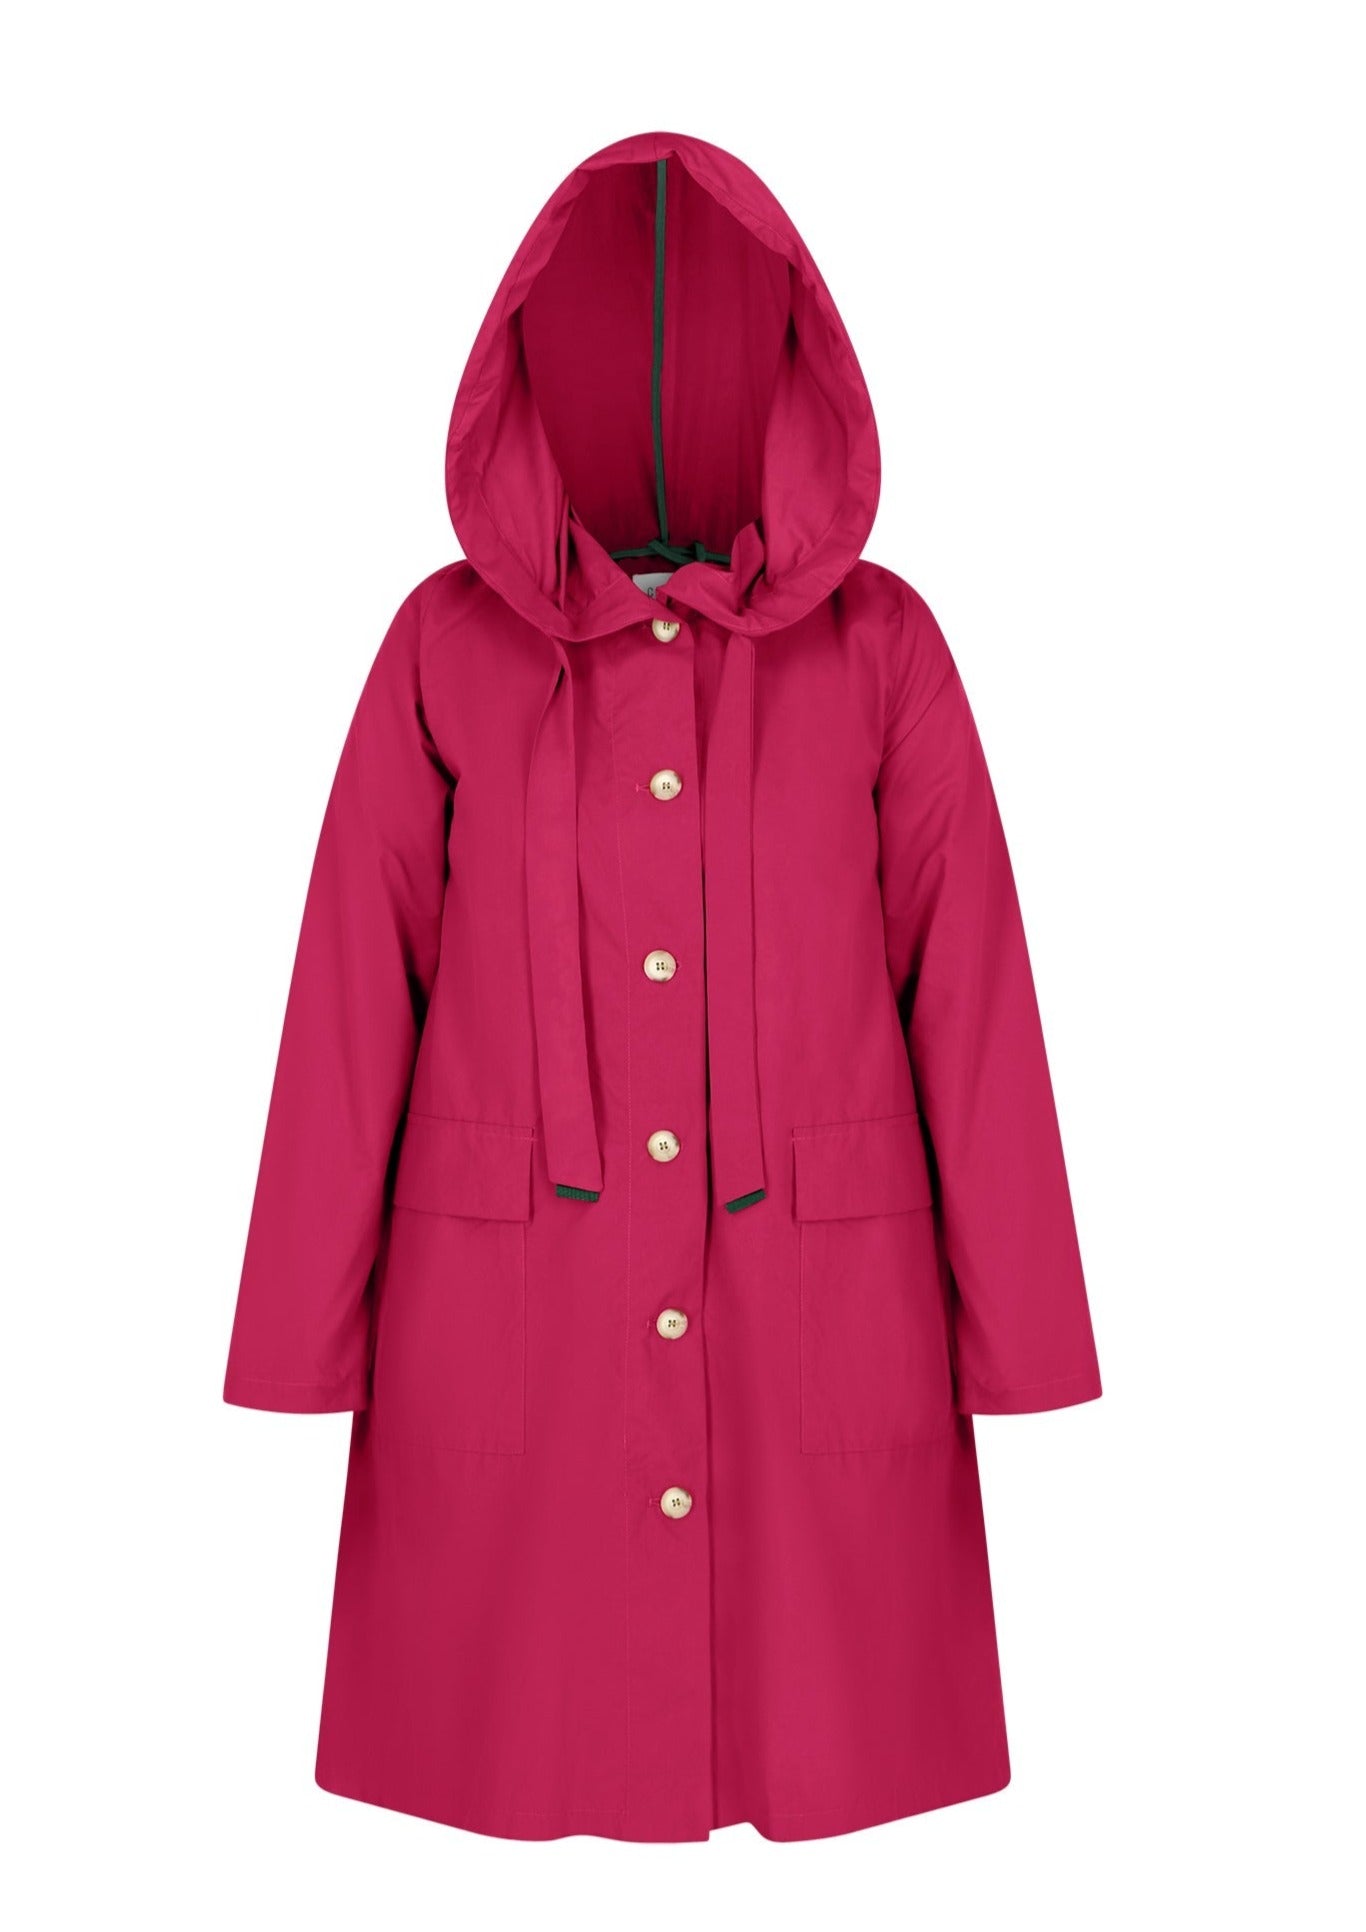 The classic raincoat - cherry color - front view